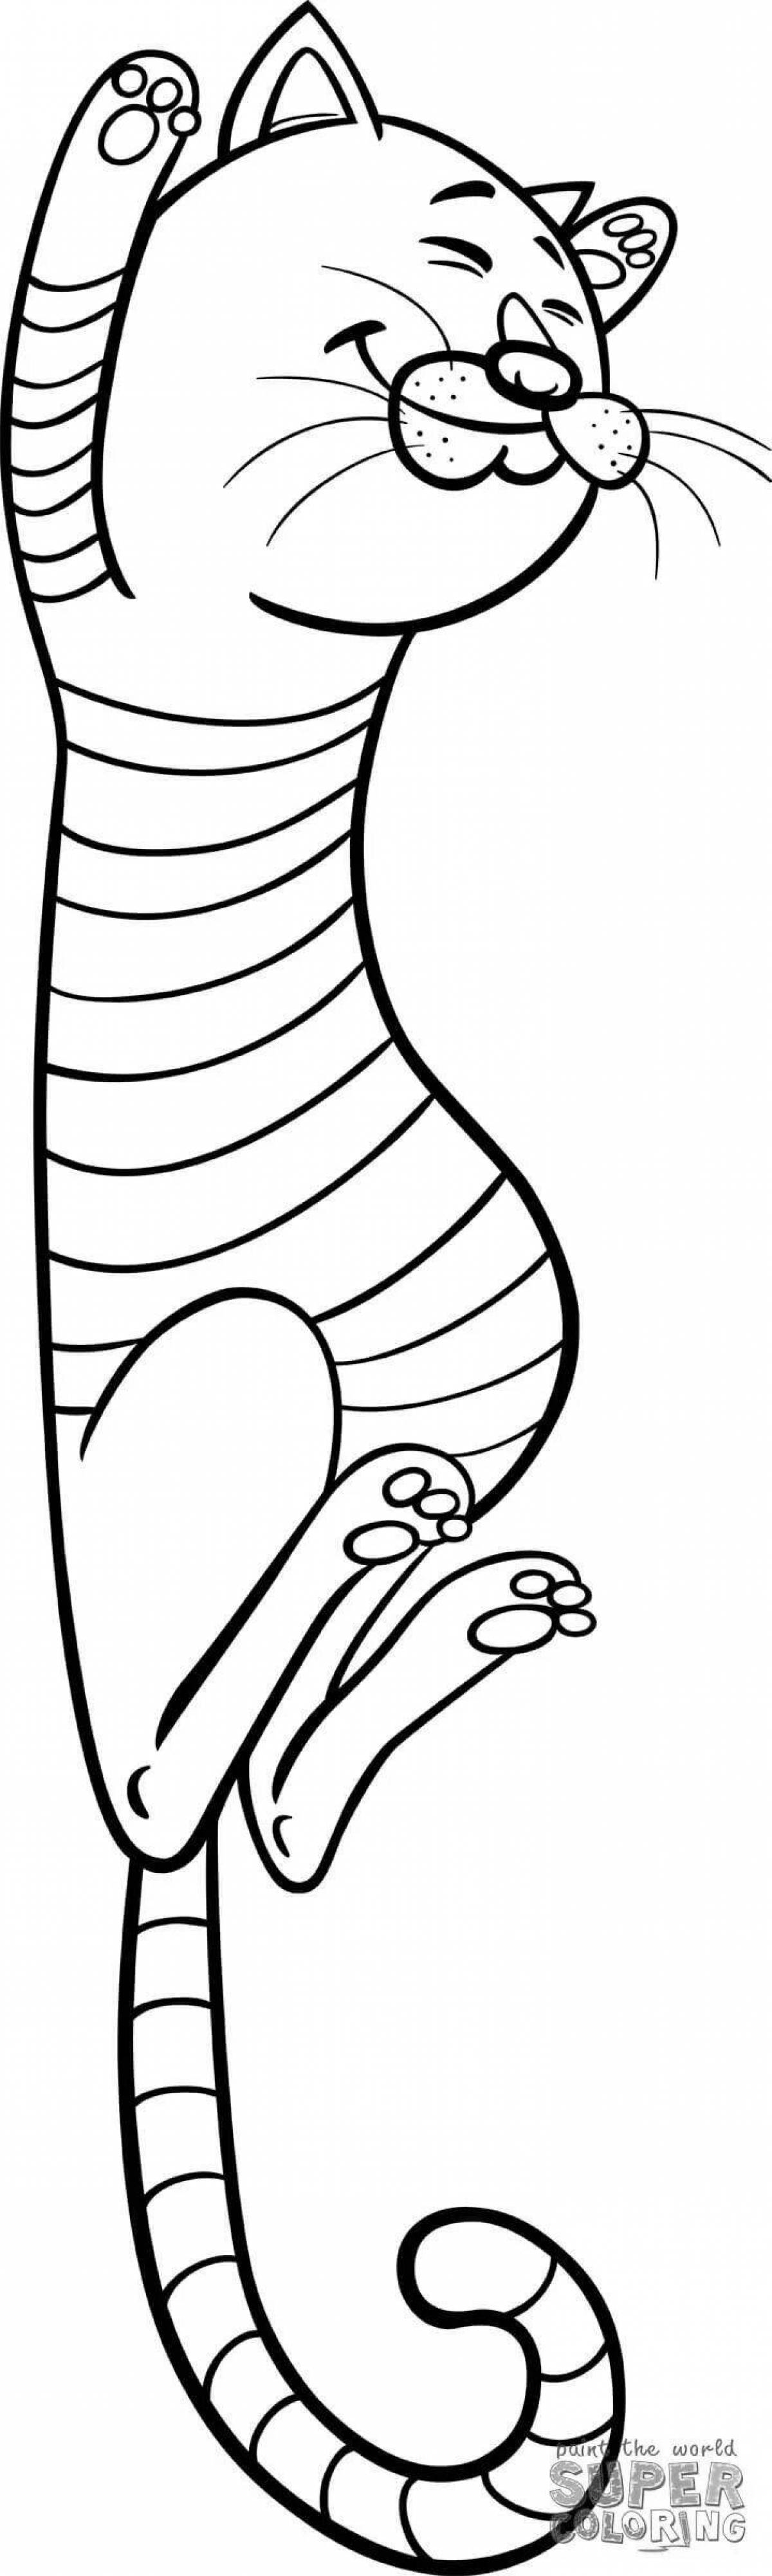 Coloring page graceful tabby cat